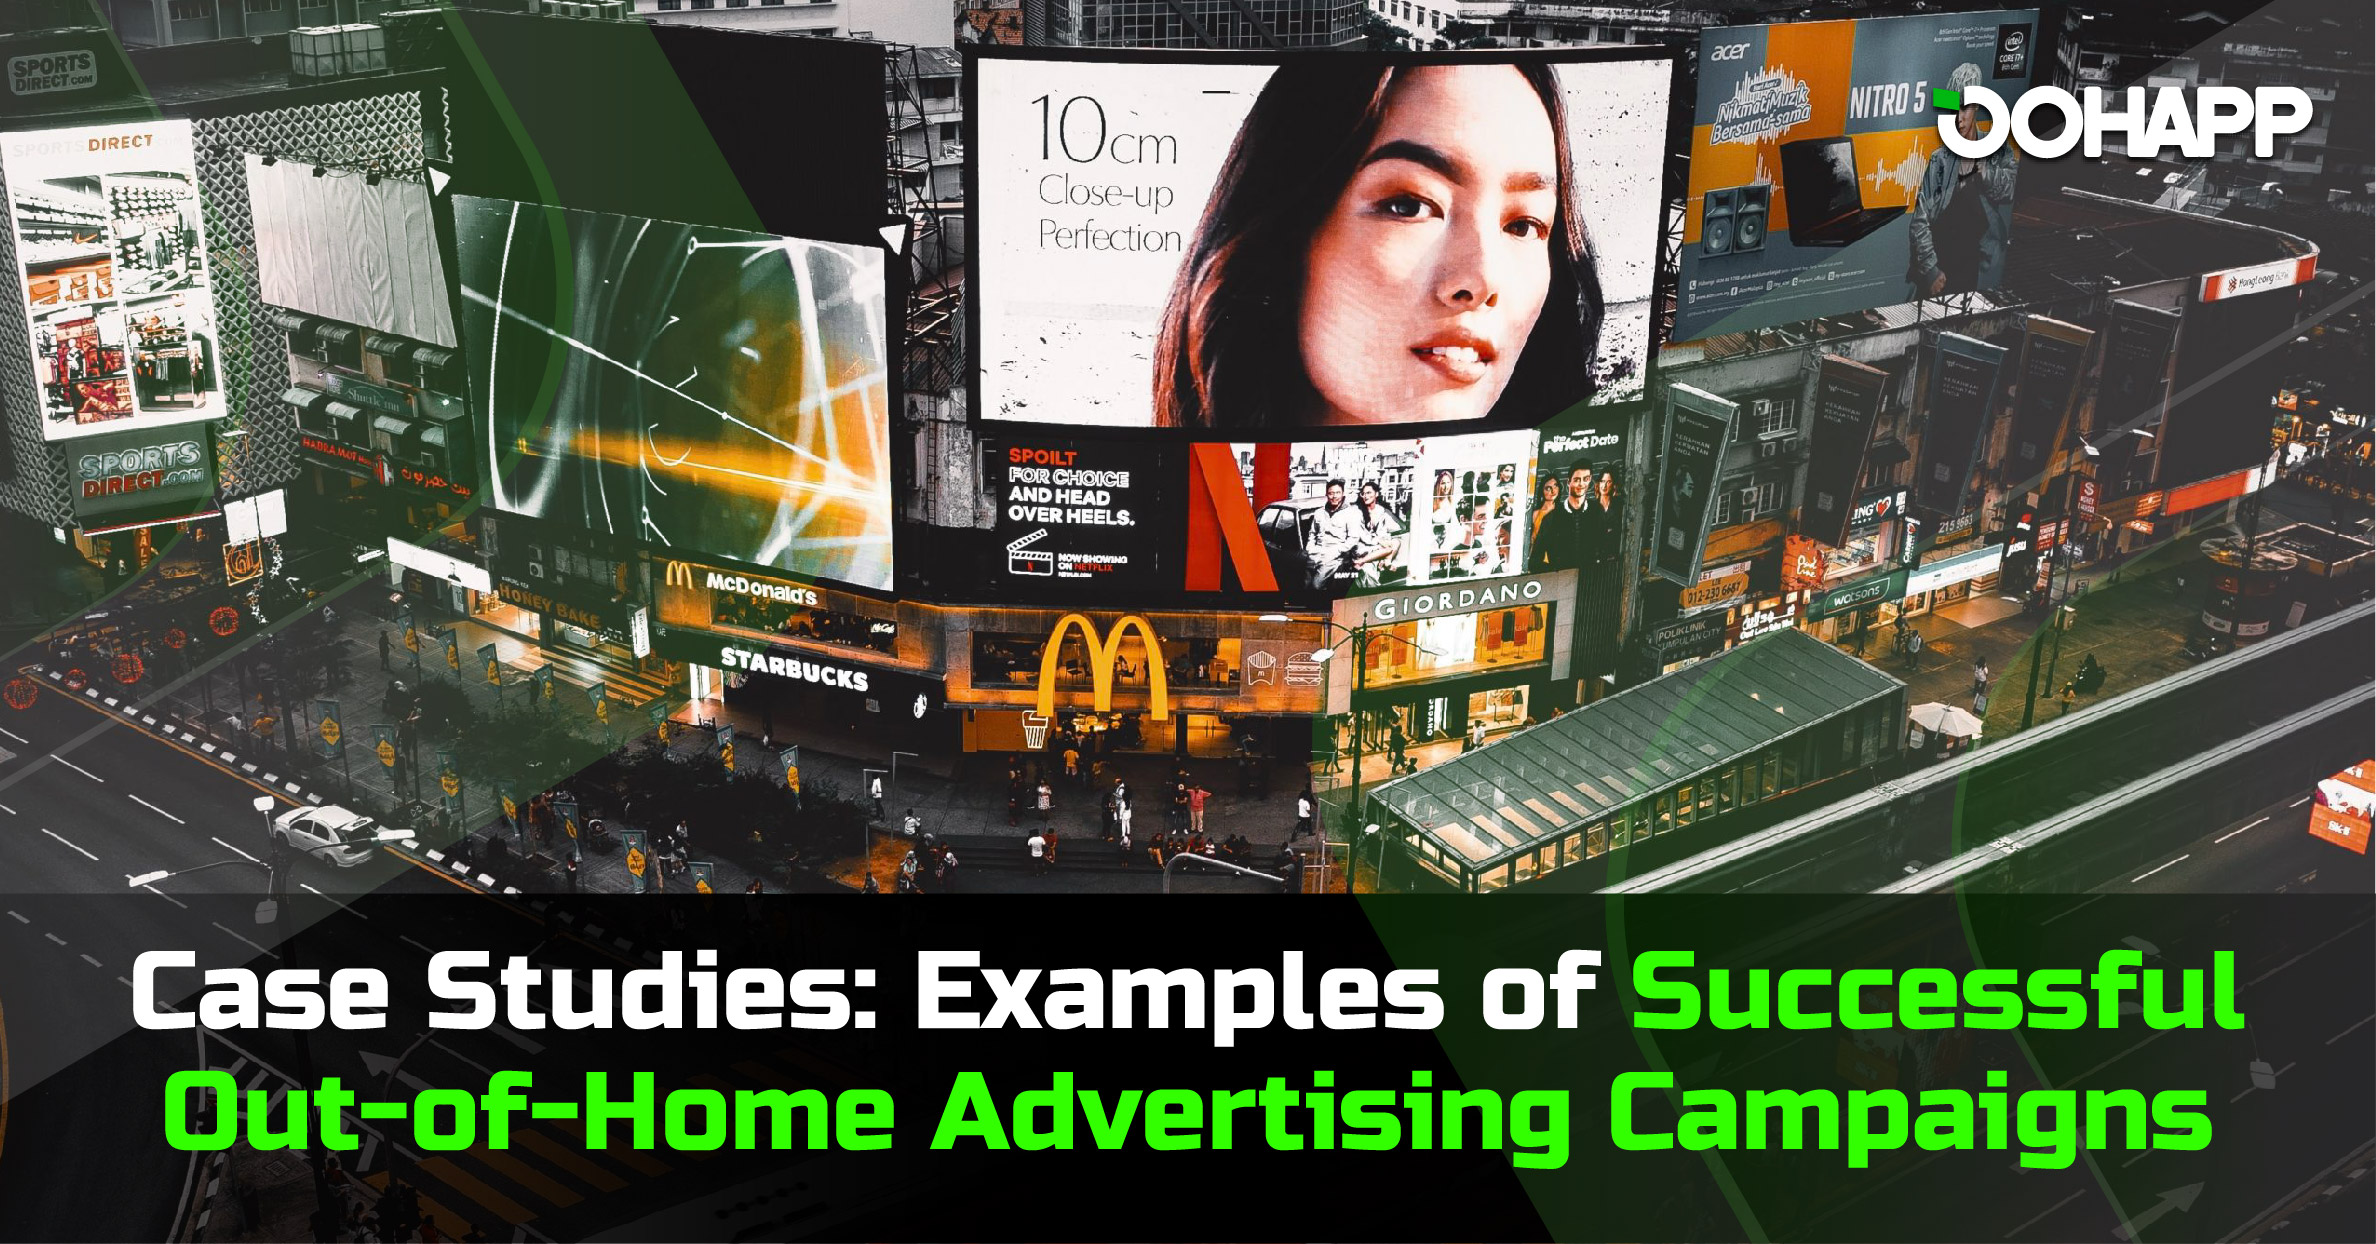 Case Studies: Examples of Successful Out-of-Home Advertising Campaigns